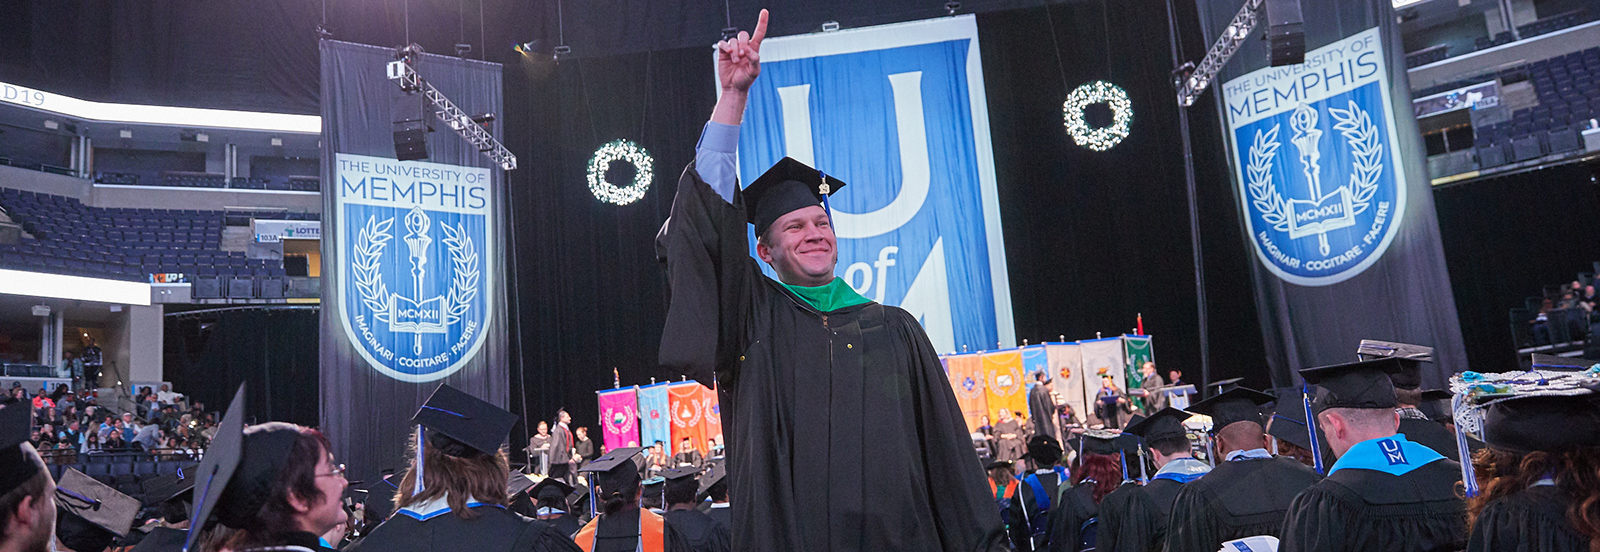 photo of male graduate holding one finger in the air gesturing "number 1" after receiving his diploma at Commencement